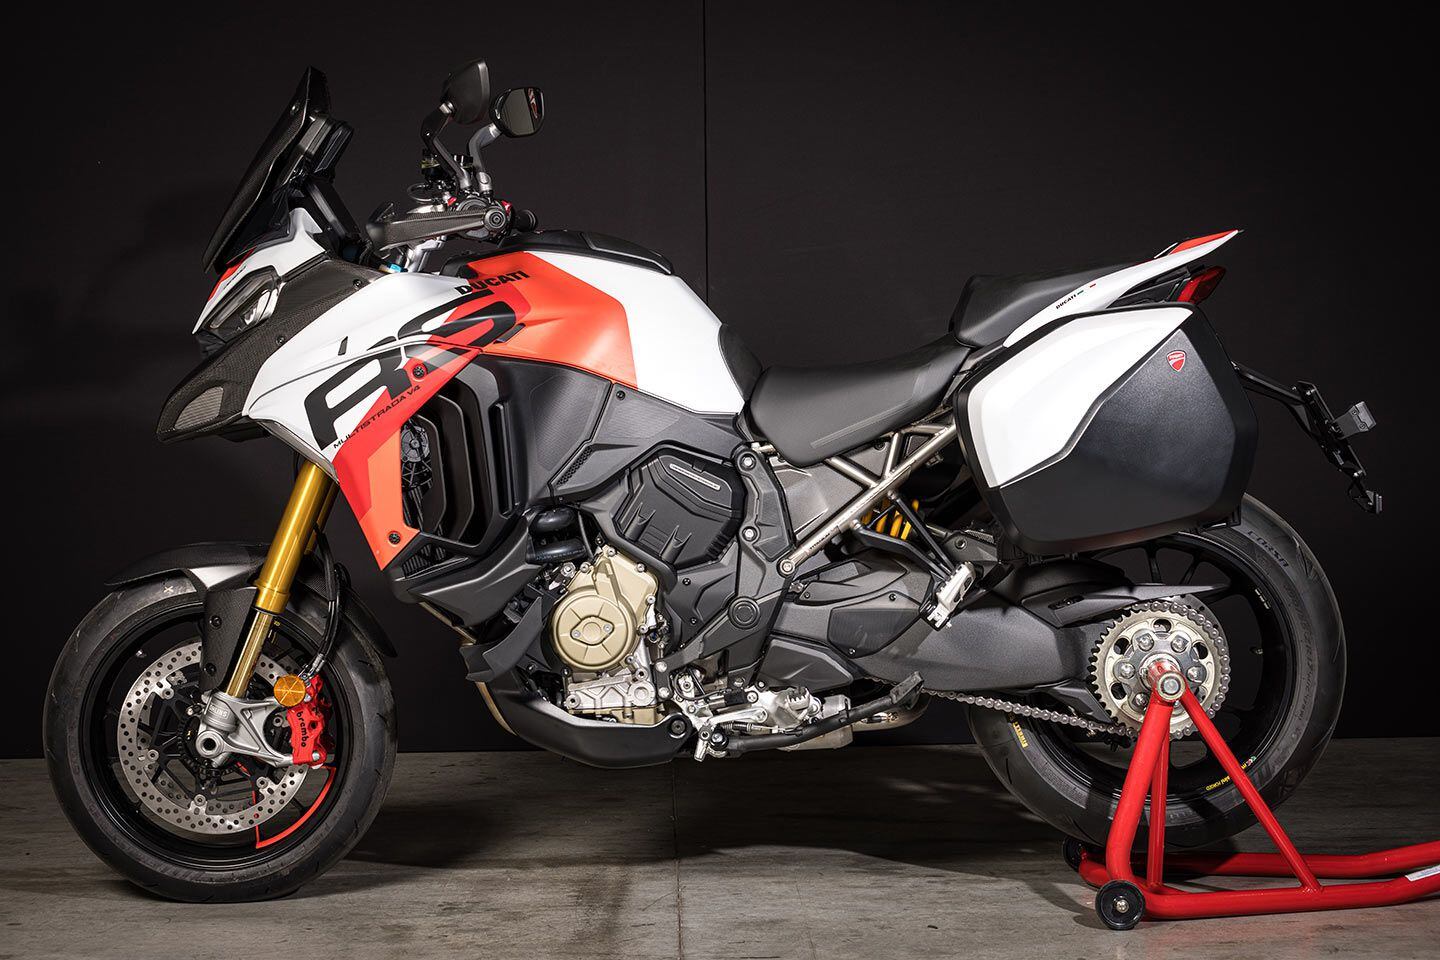 Slap some bags on the Multistrada V4 RS and hit the road for your favorite track.